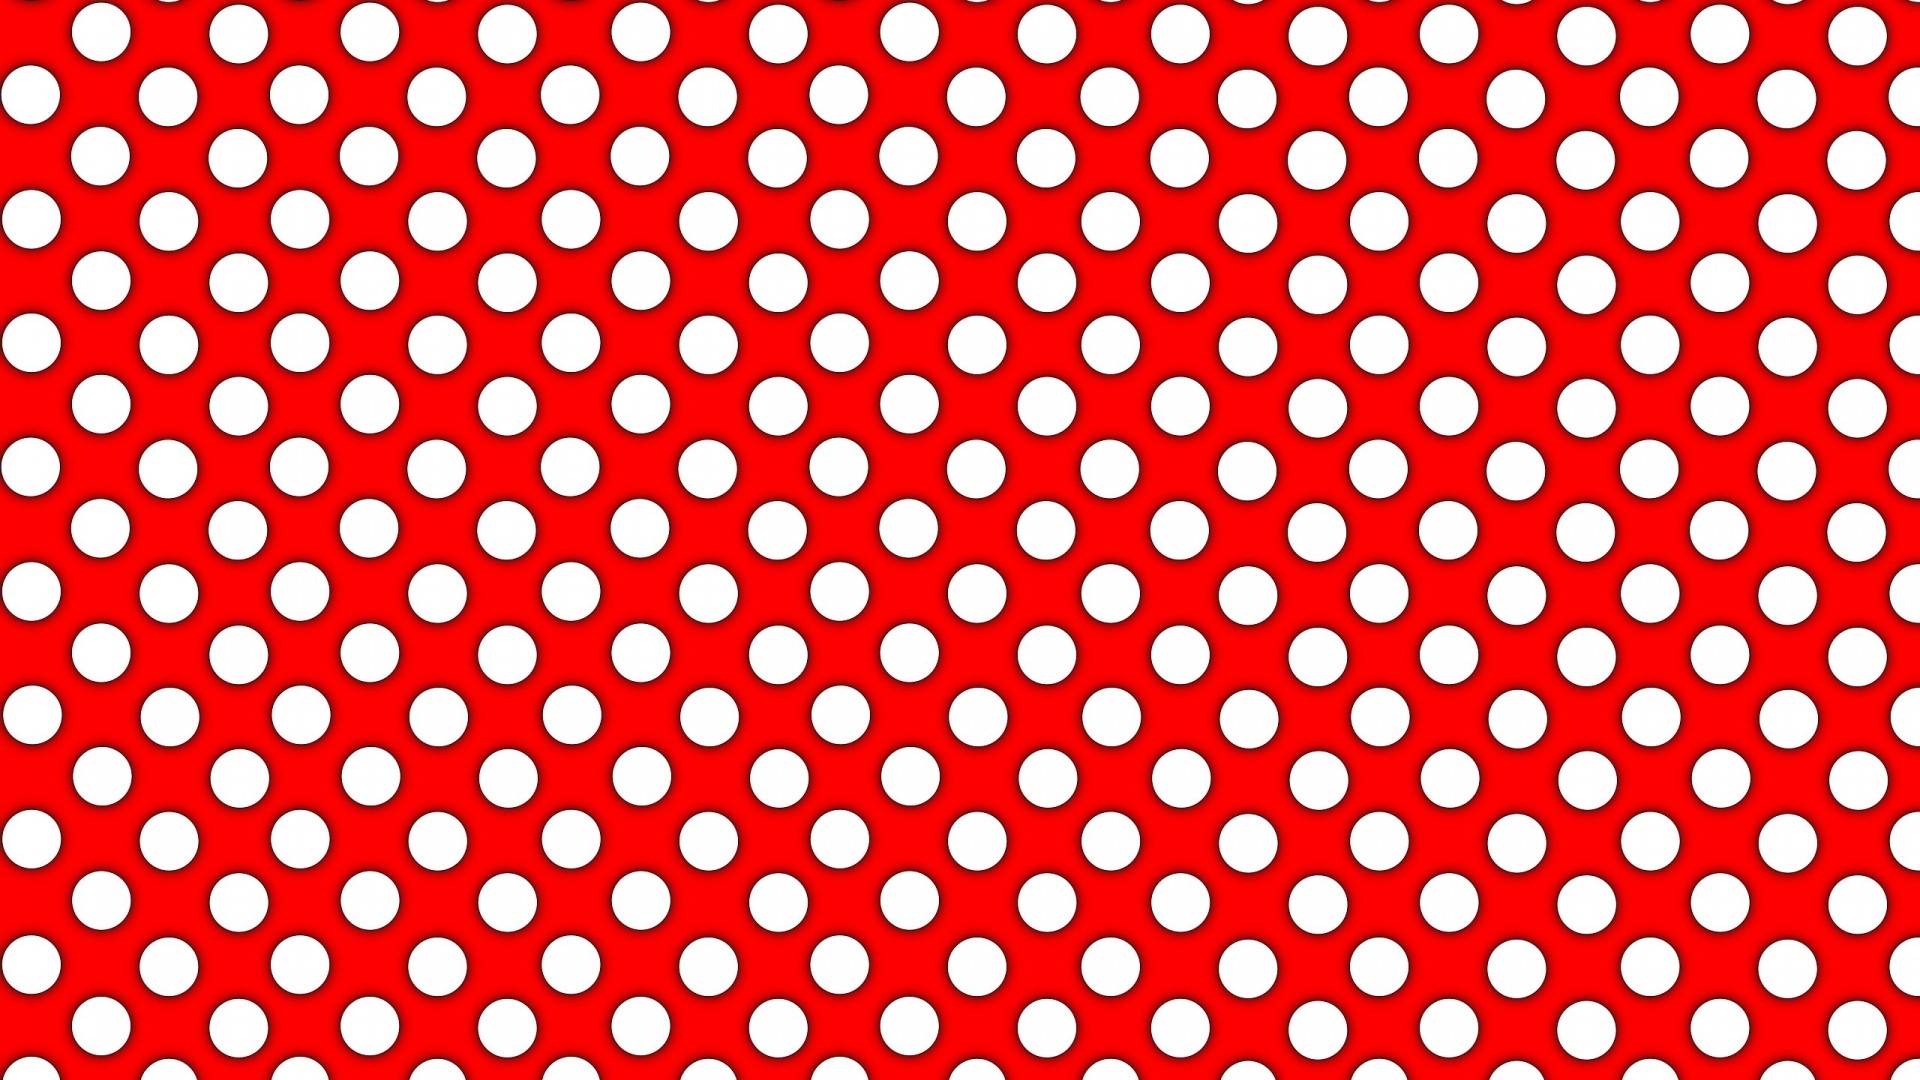 Minnie Mouse Polka Dot Wallpapers